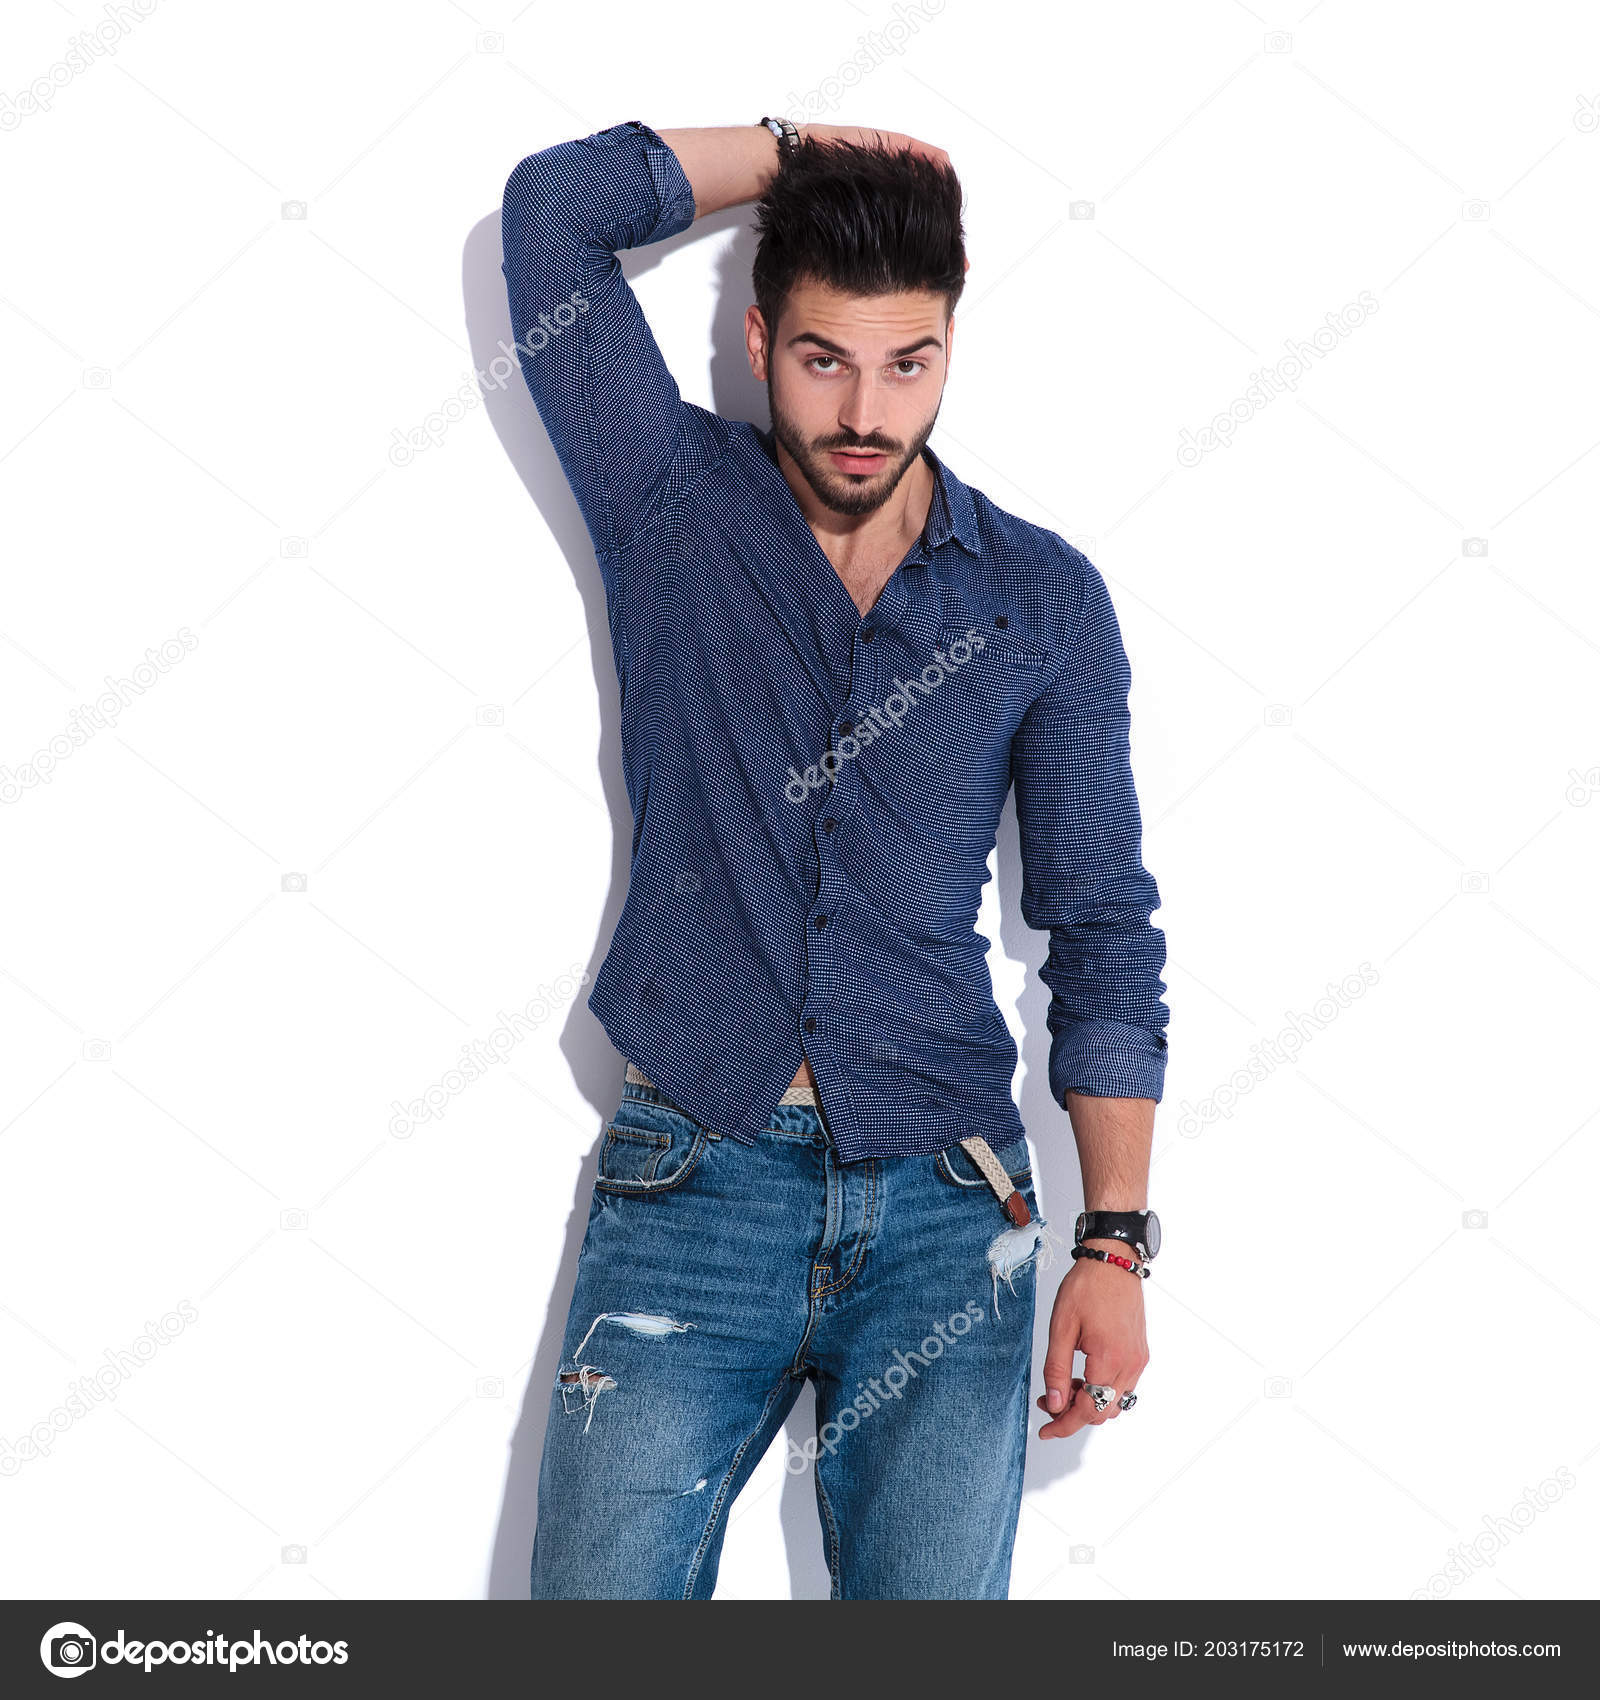 navy shirt and blue jeans